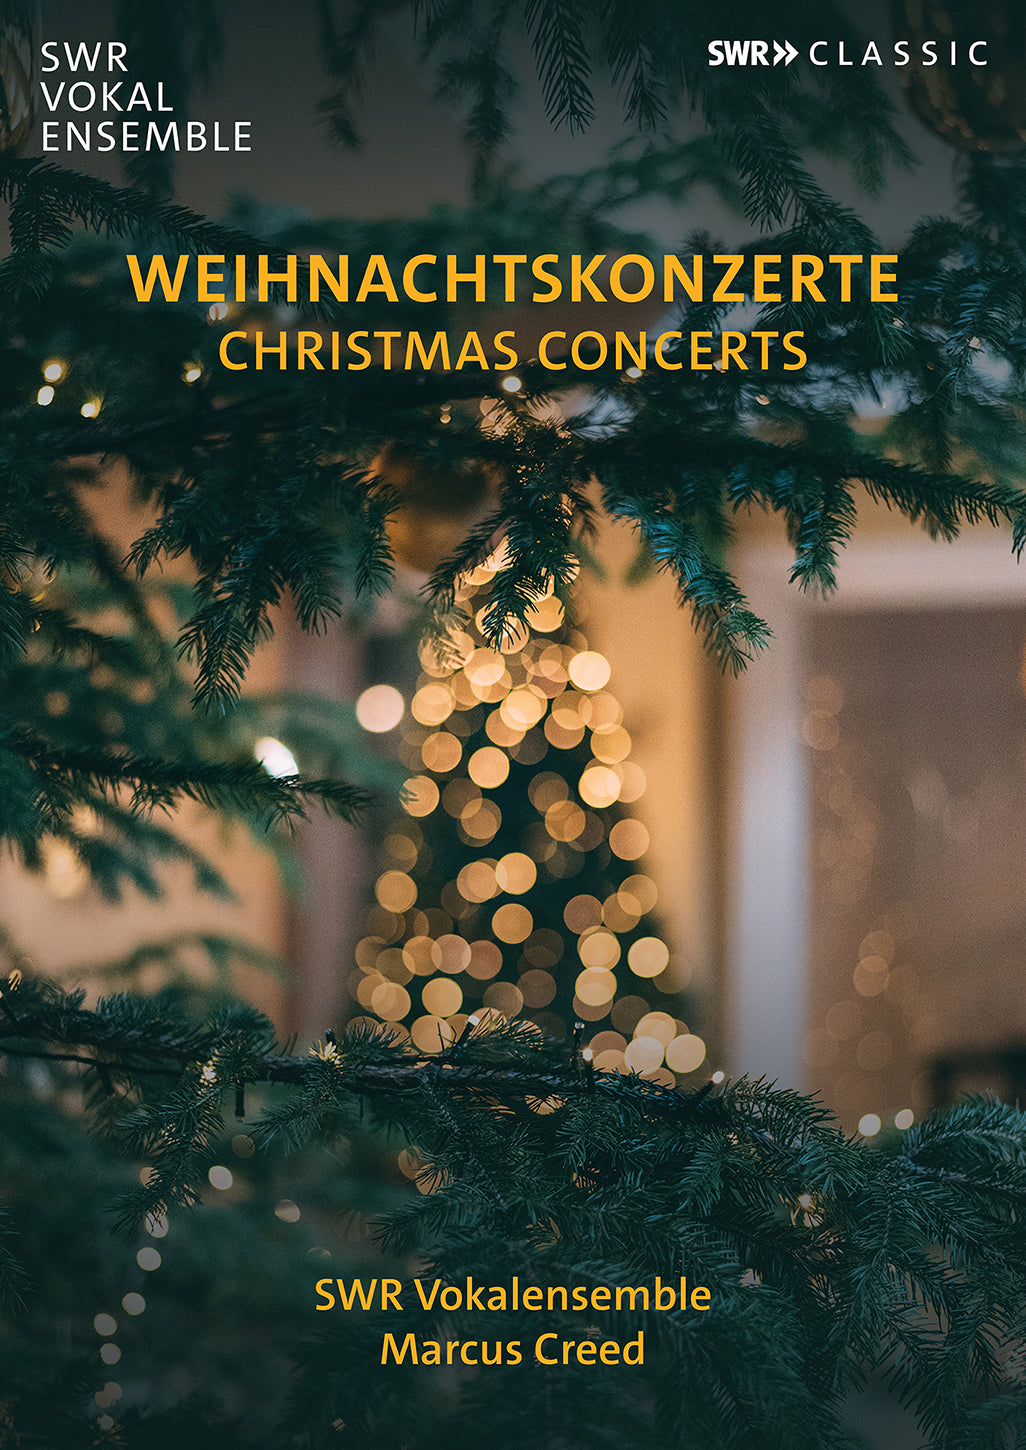 Weihnachtskonzerte (Christmas Concerts) / Marcus Creed, SWR Vocal Ensemble